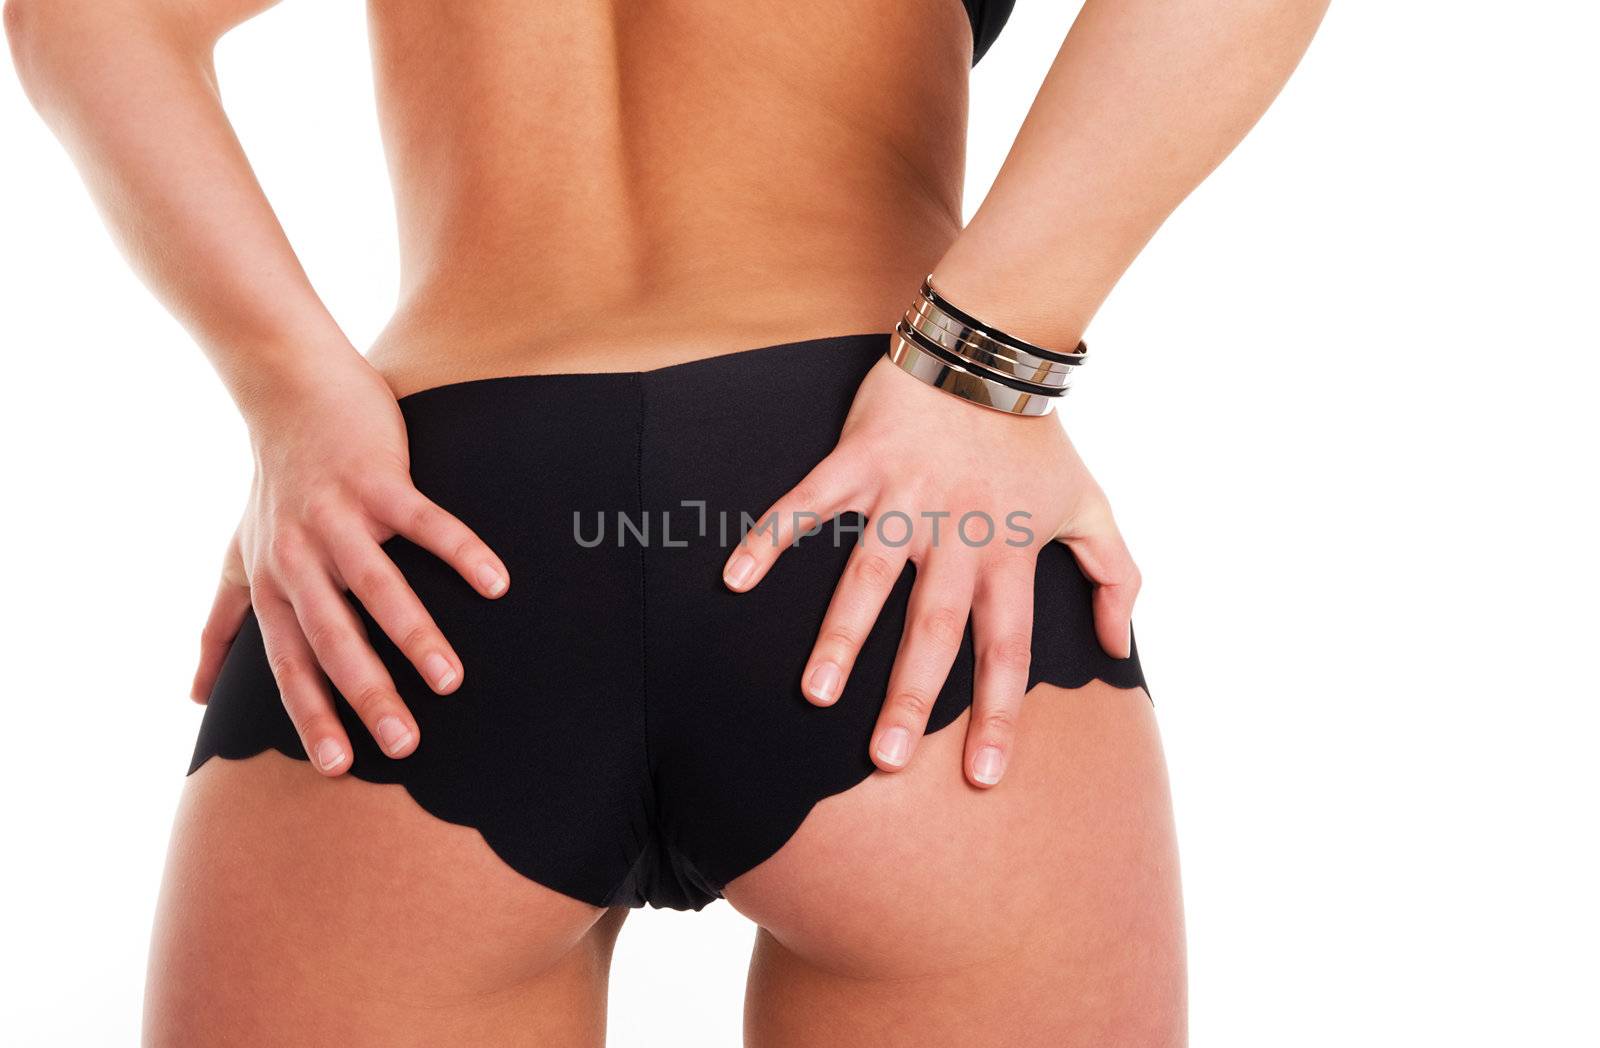 View of a girls butt seen against white background